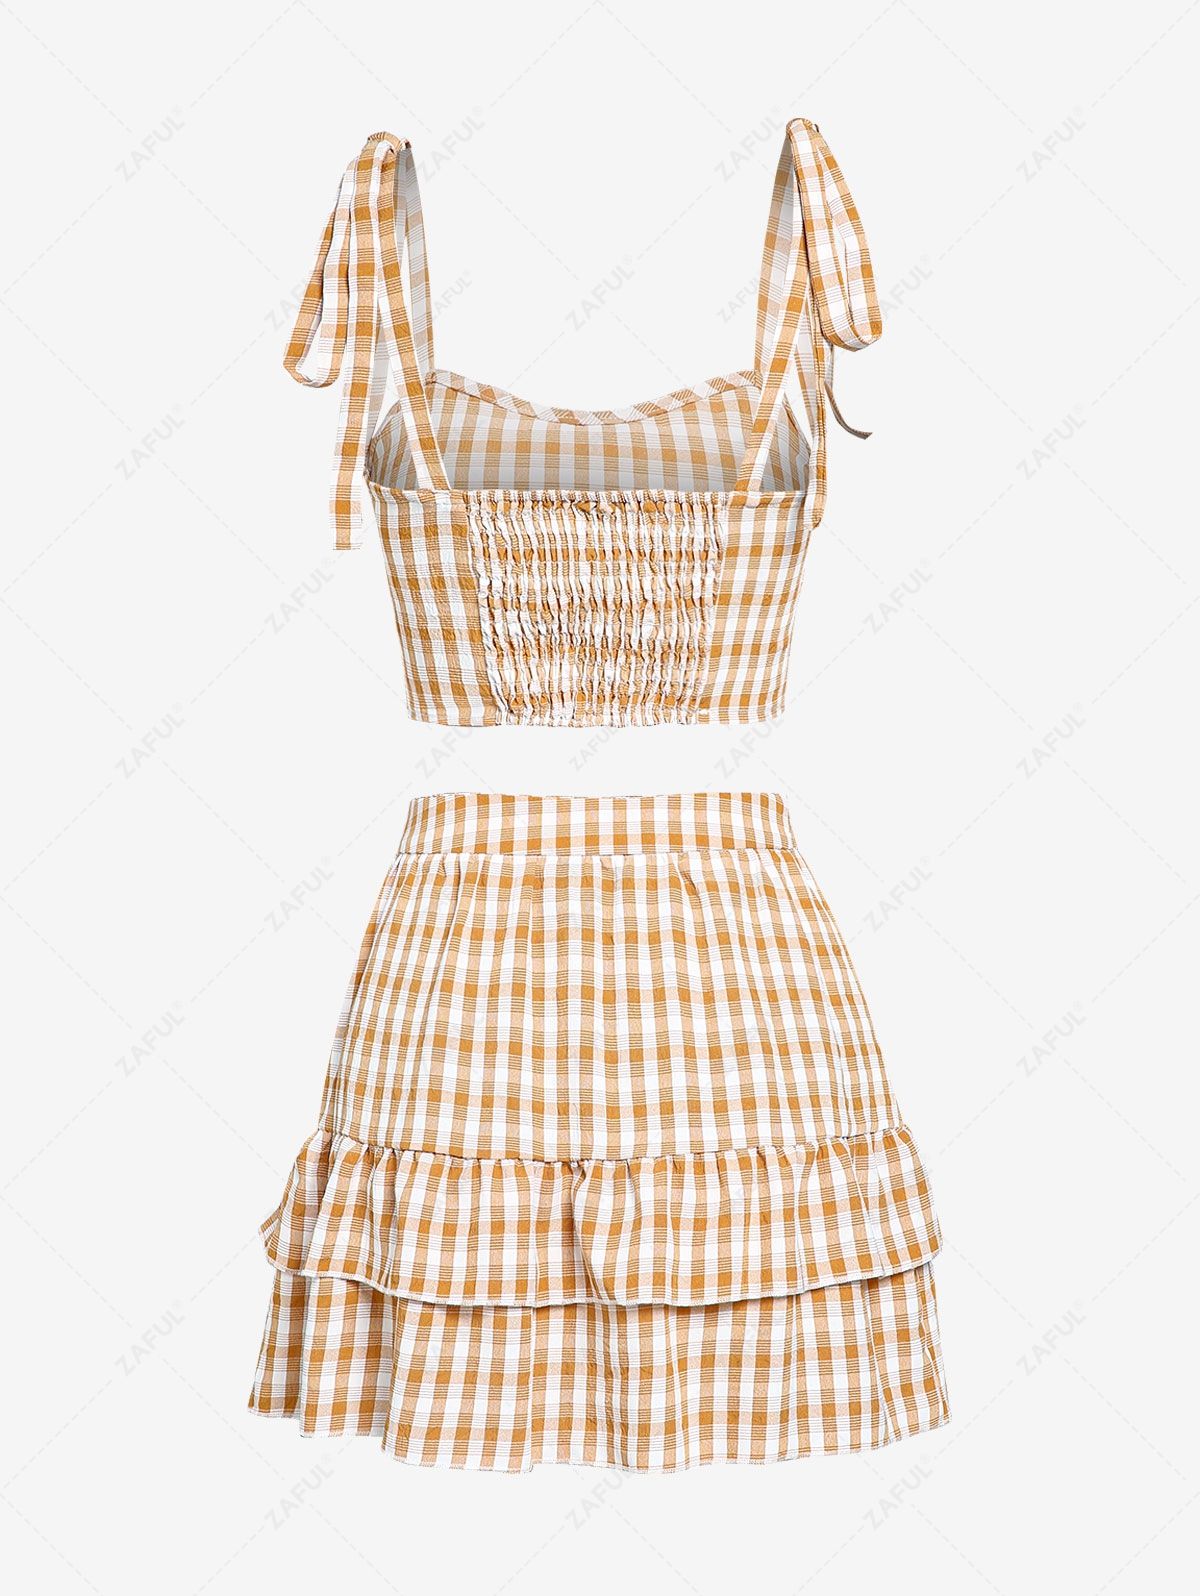  ZAFUL Gingham Tie Shoulder Top and Layered Skirt Set